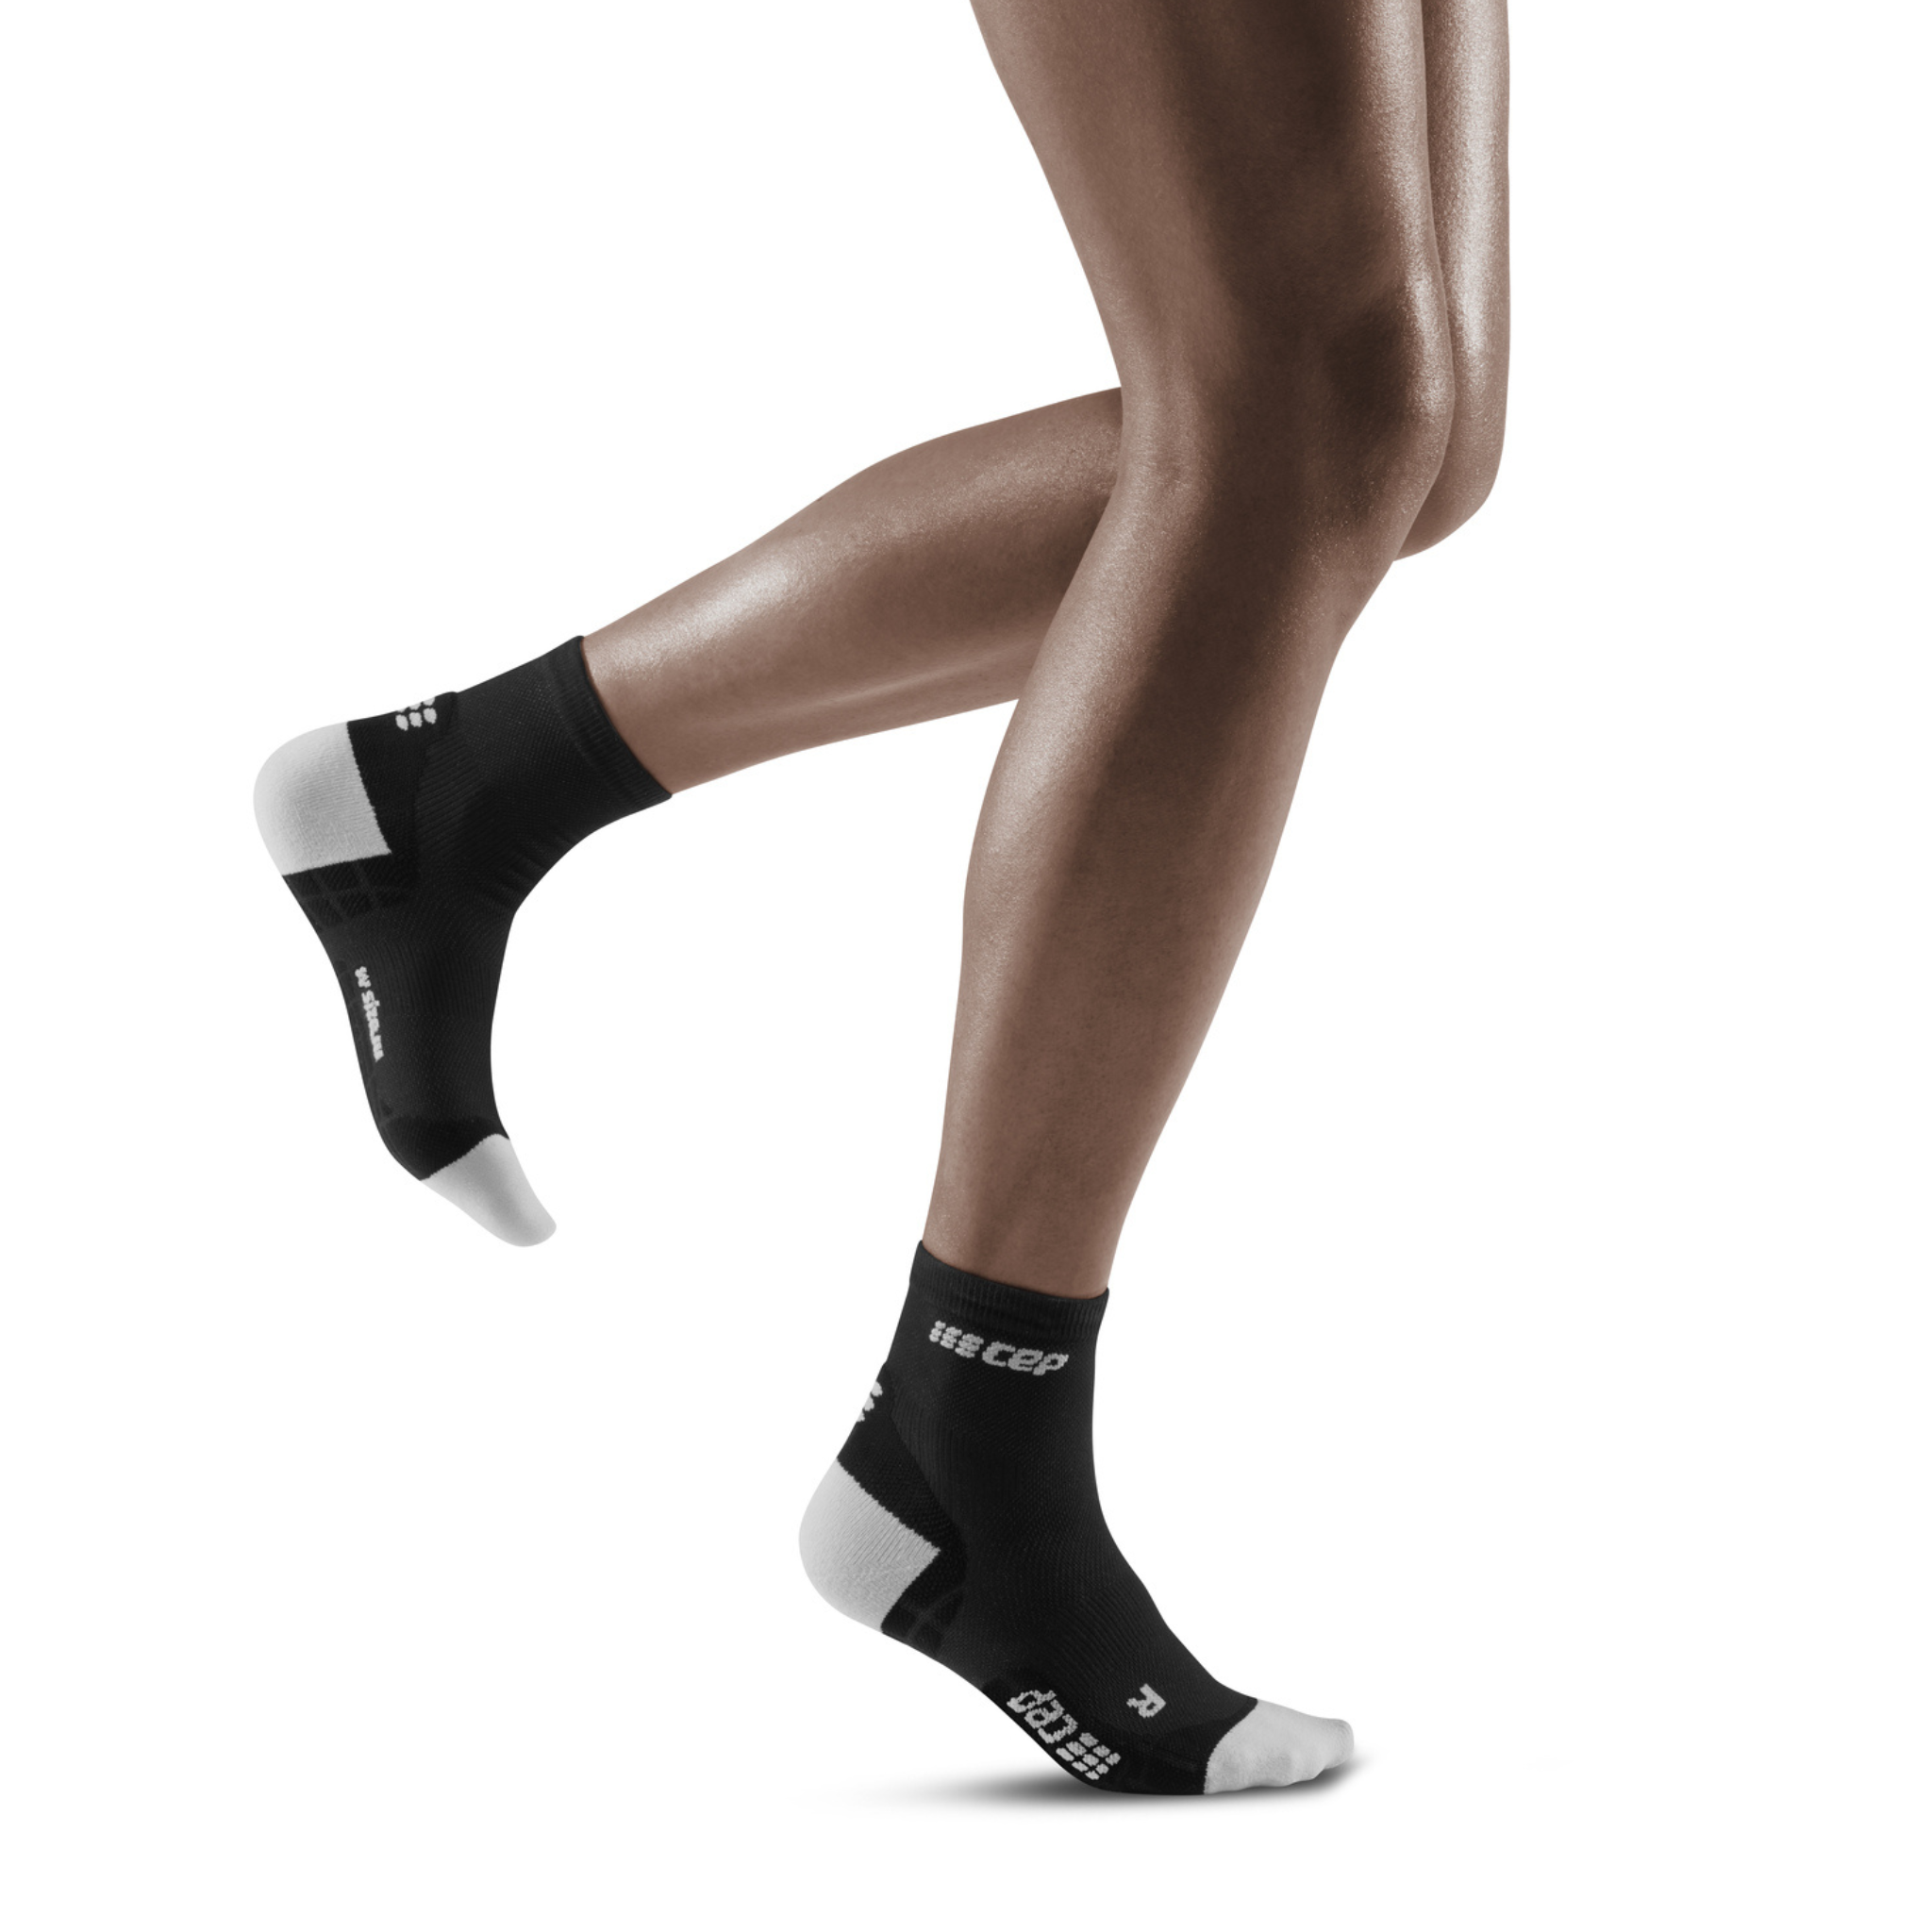 CEP - Ultralight Compression No Show Socks for Women, Ankle High Sports  Socks with Compression in Carbon White, Size II